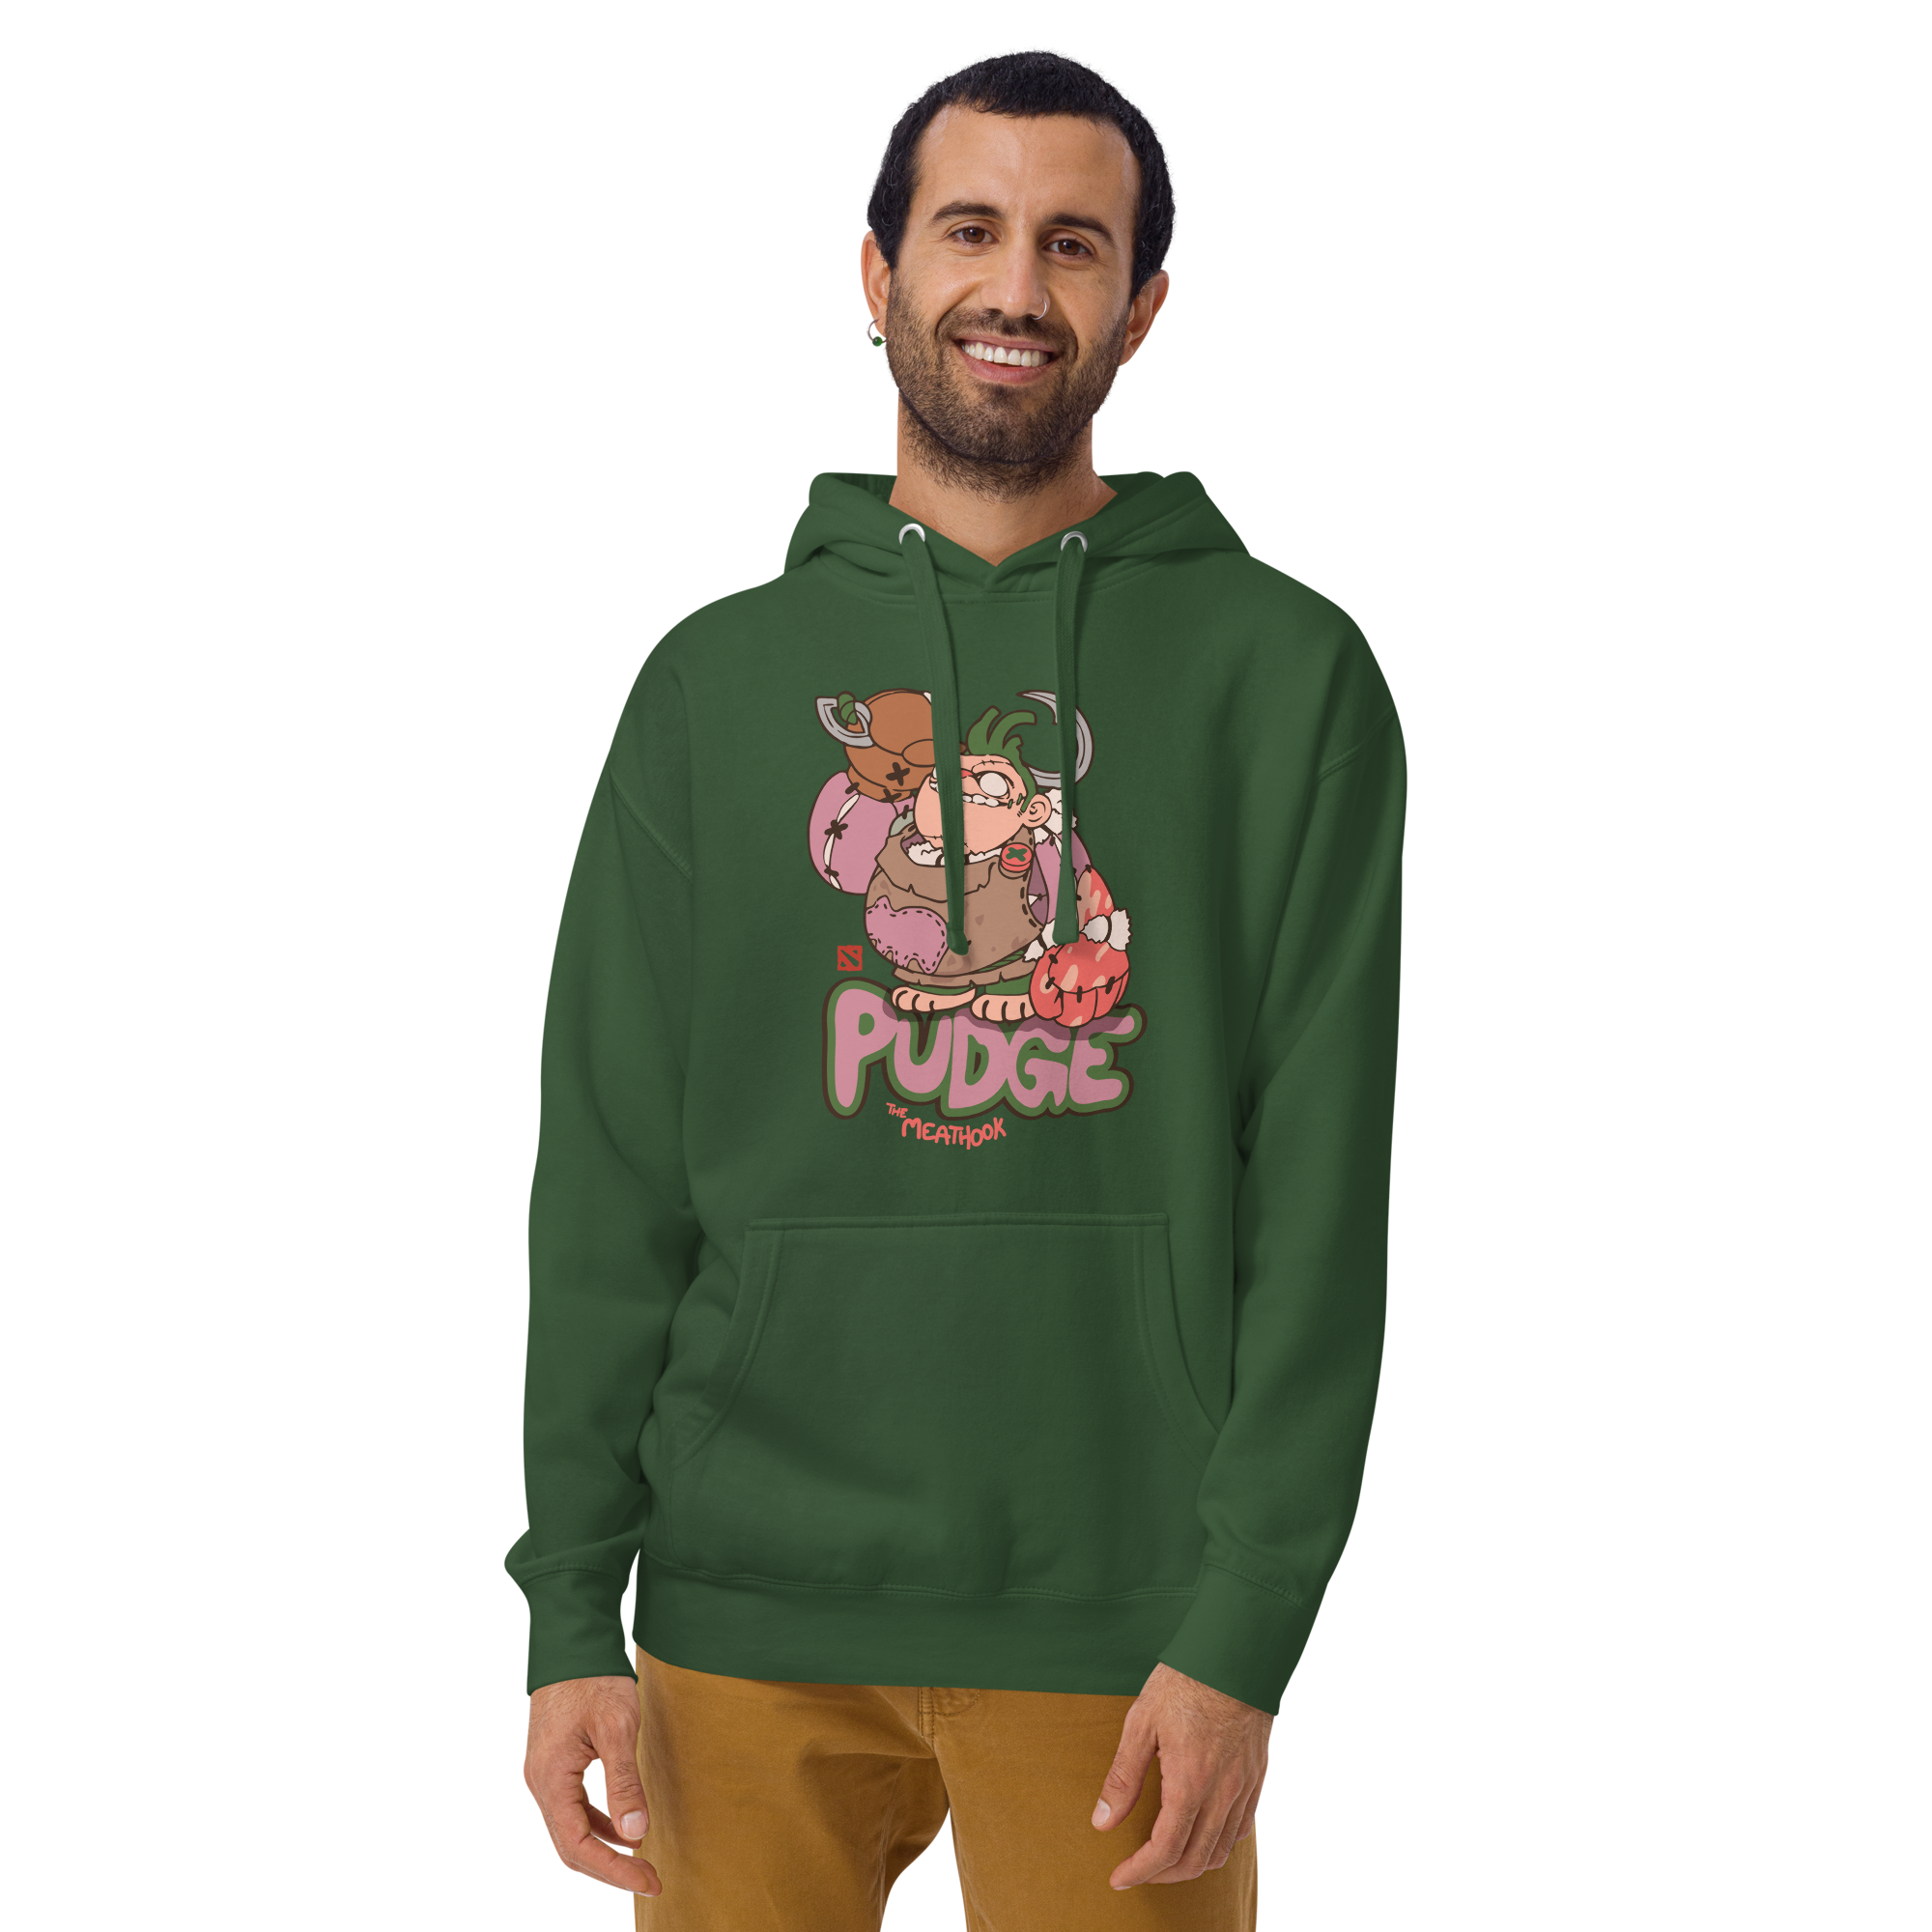 Pudge Hoodie - Forest